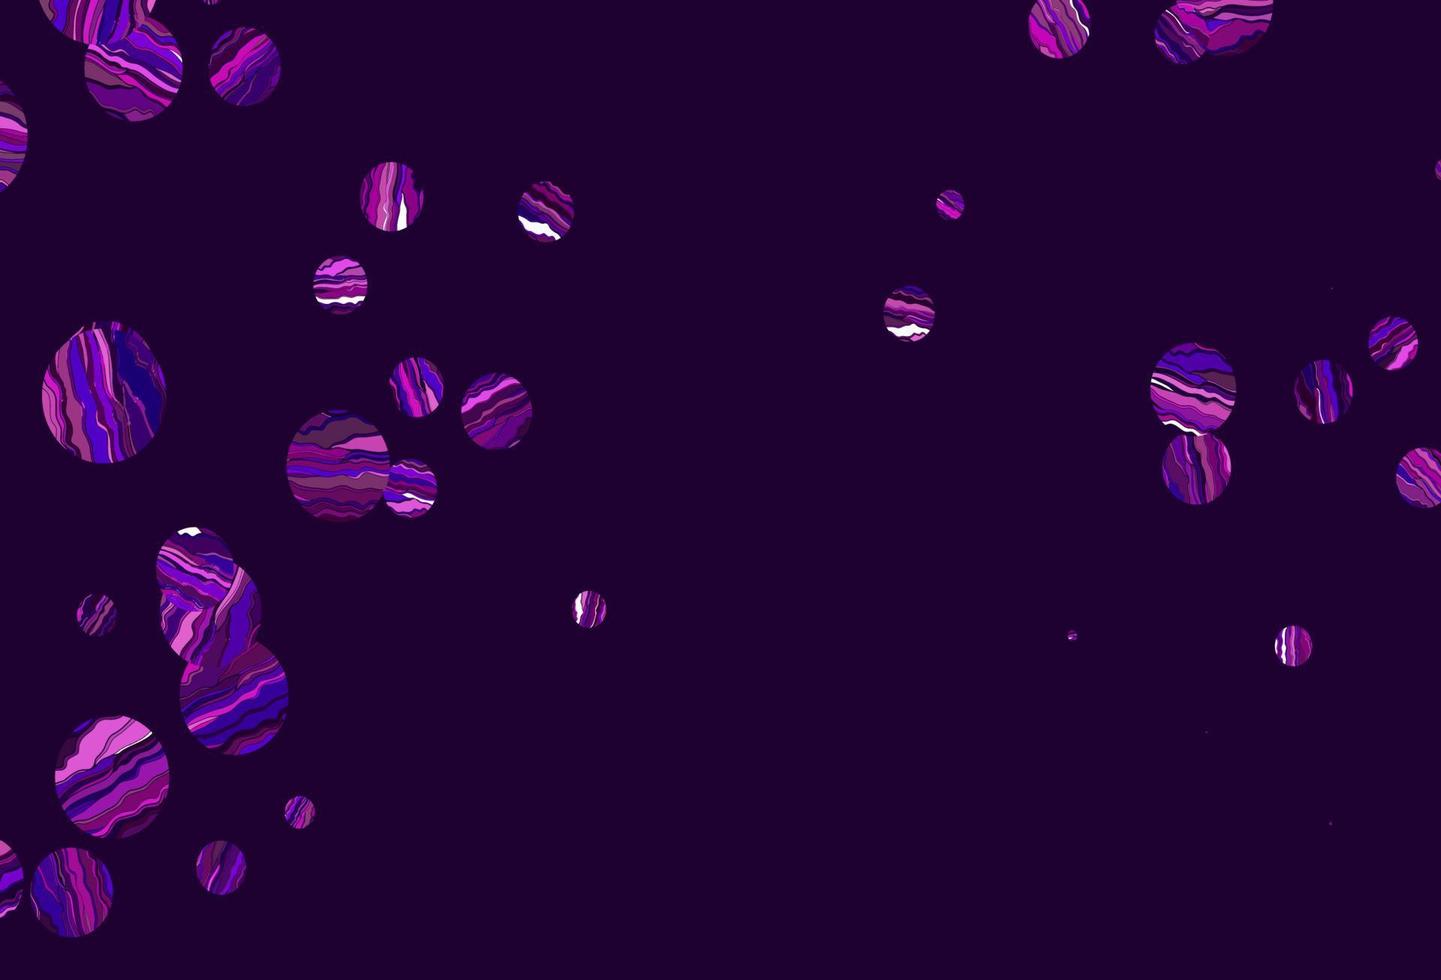 Light purple vector layout with circle shapes.